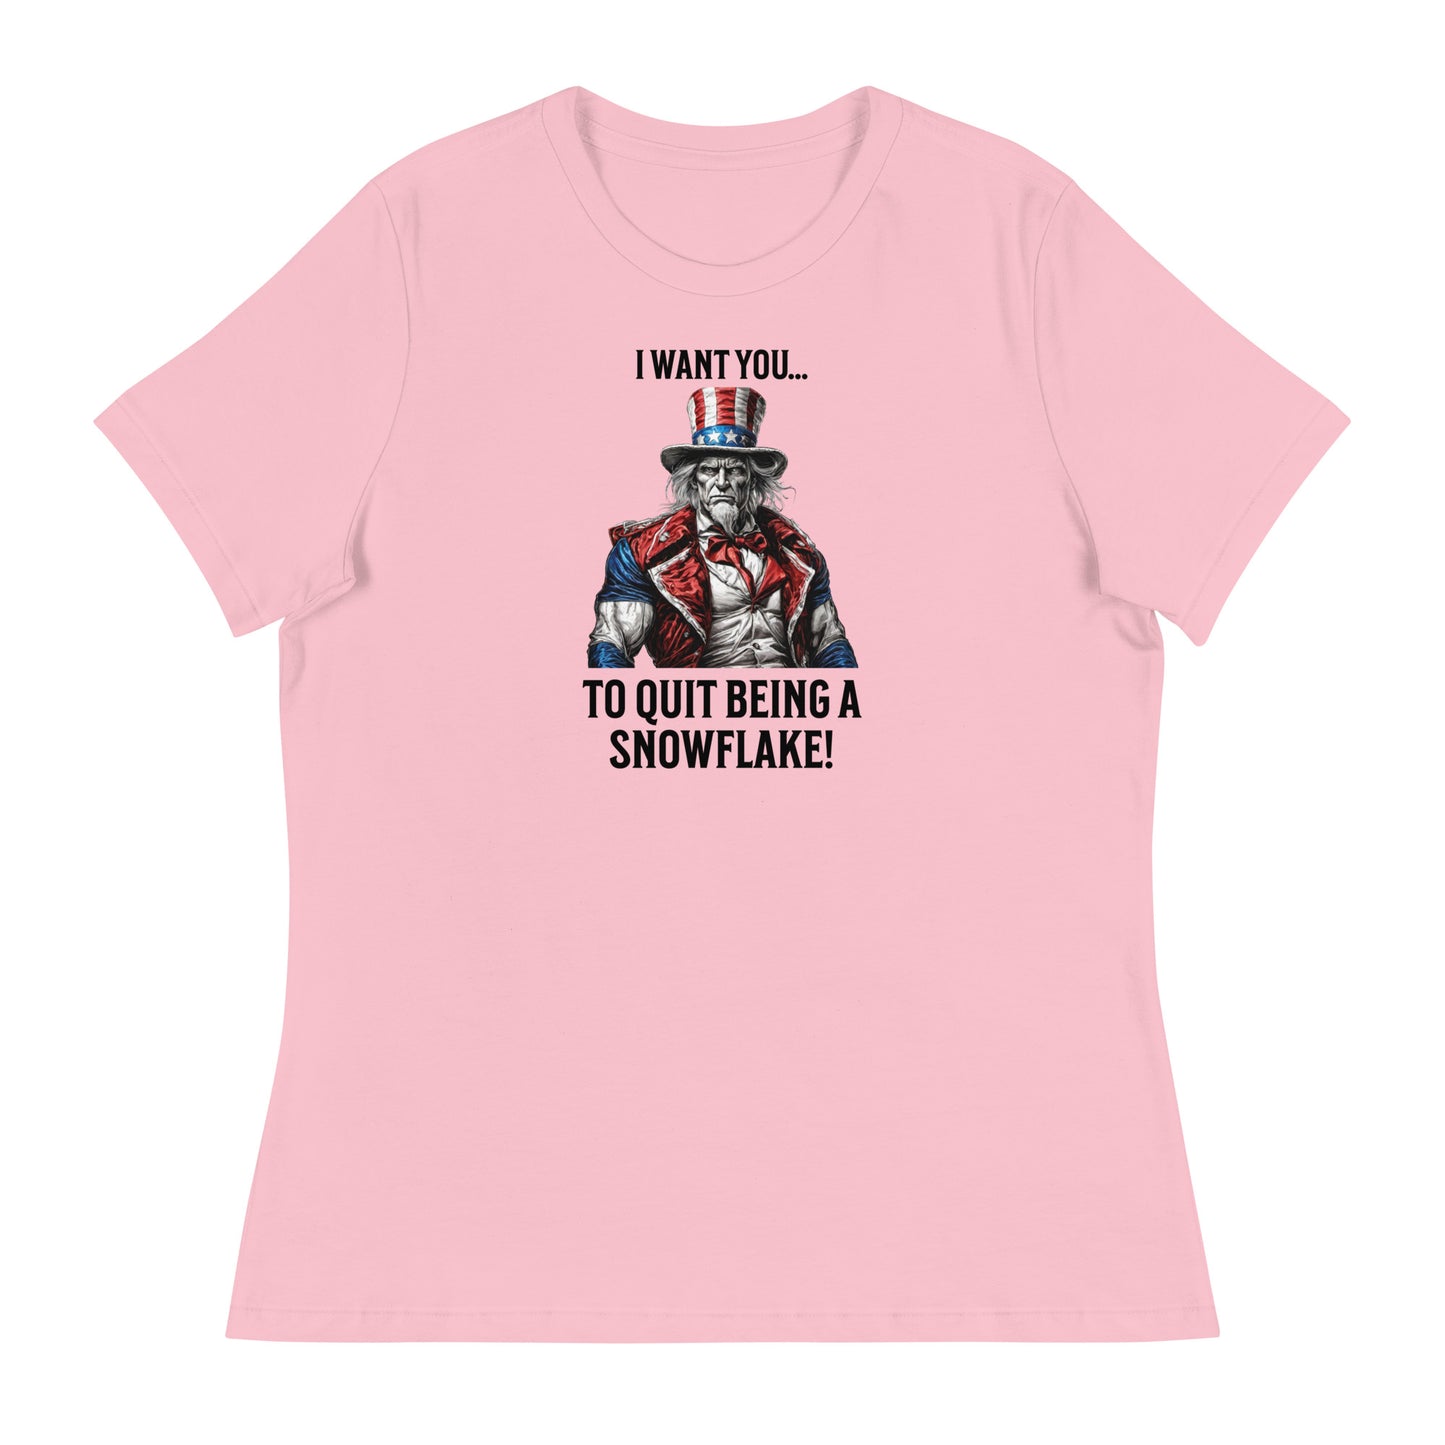 Quit Being a Snowflake Women's T-Shirt Pink